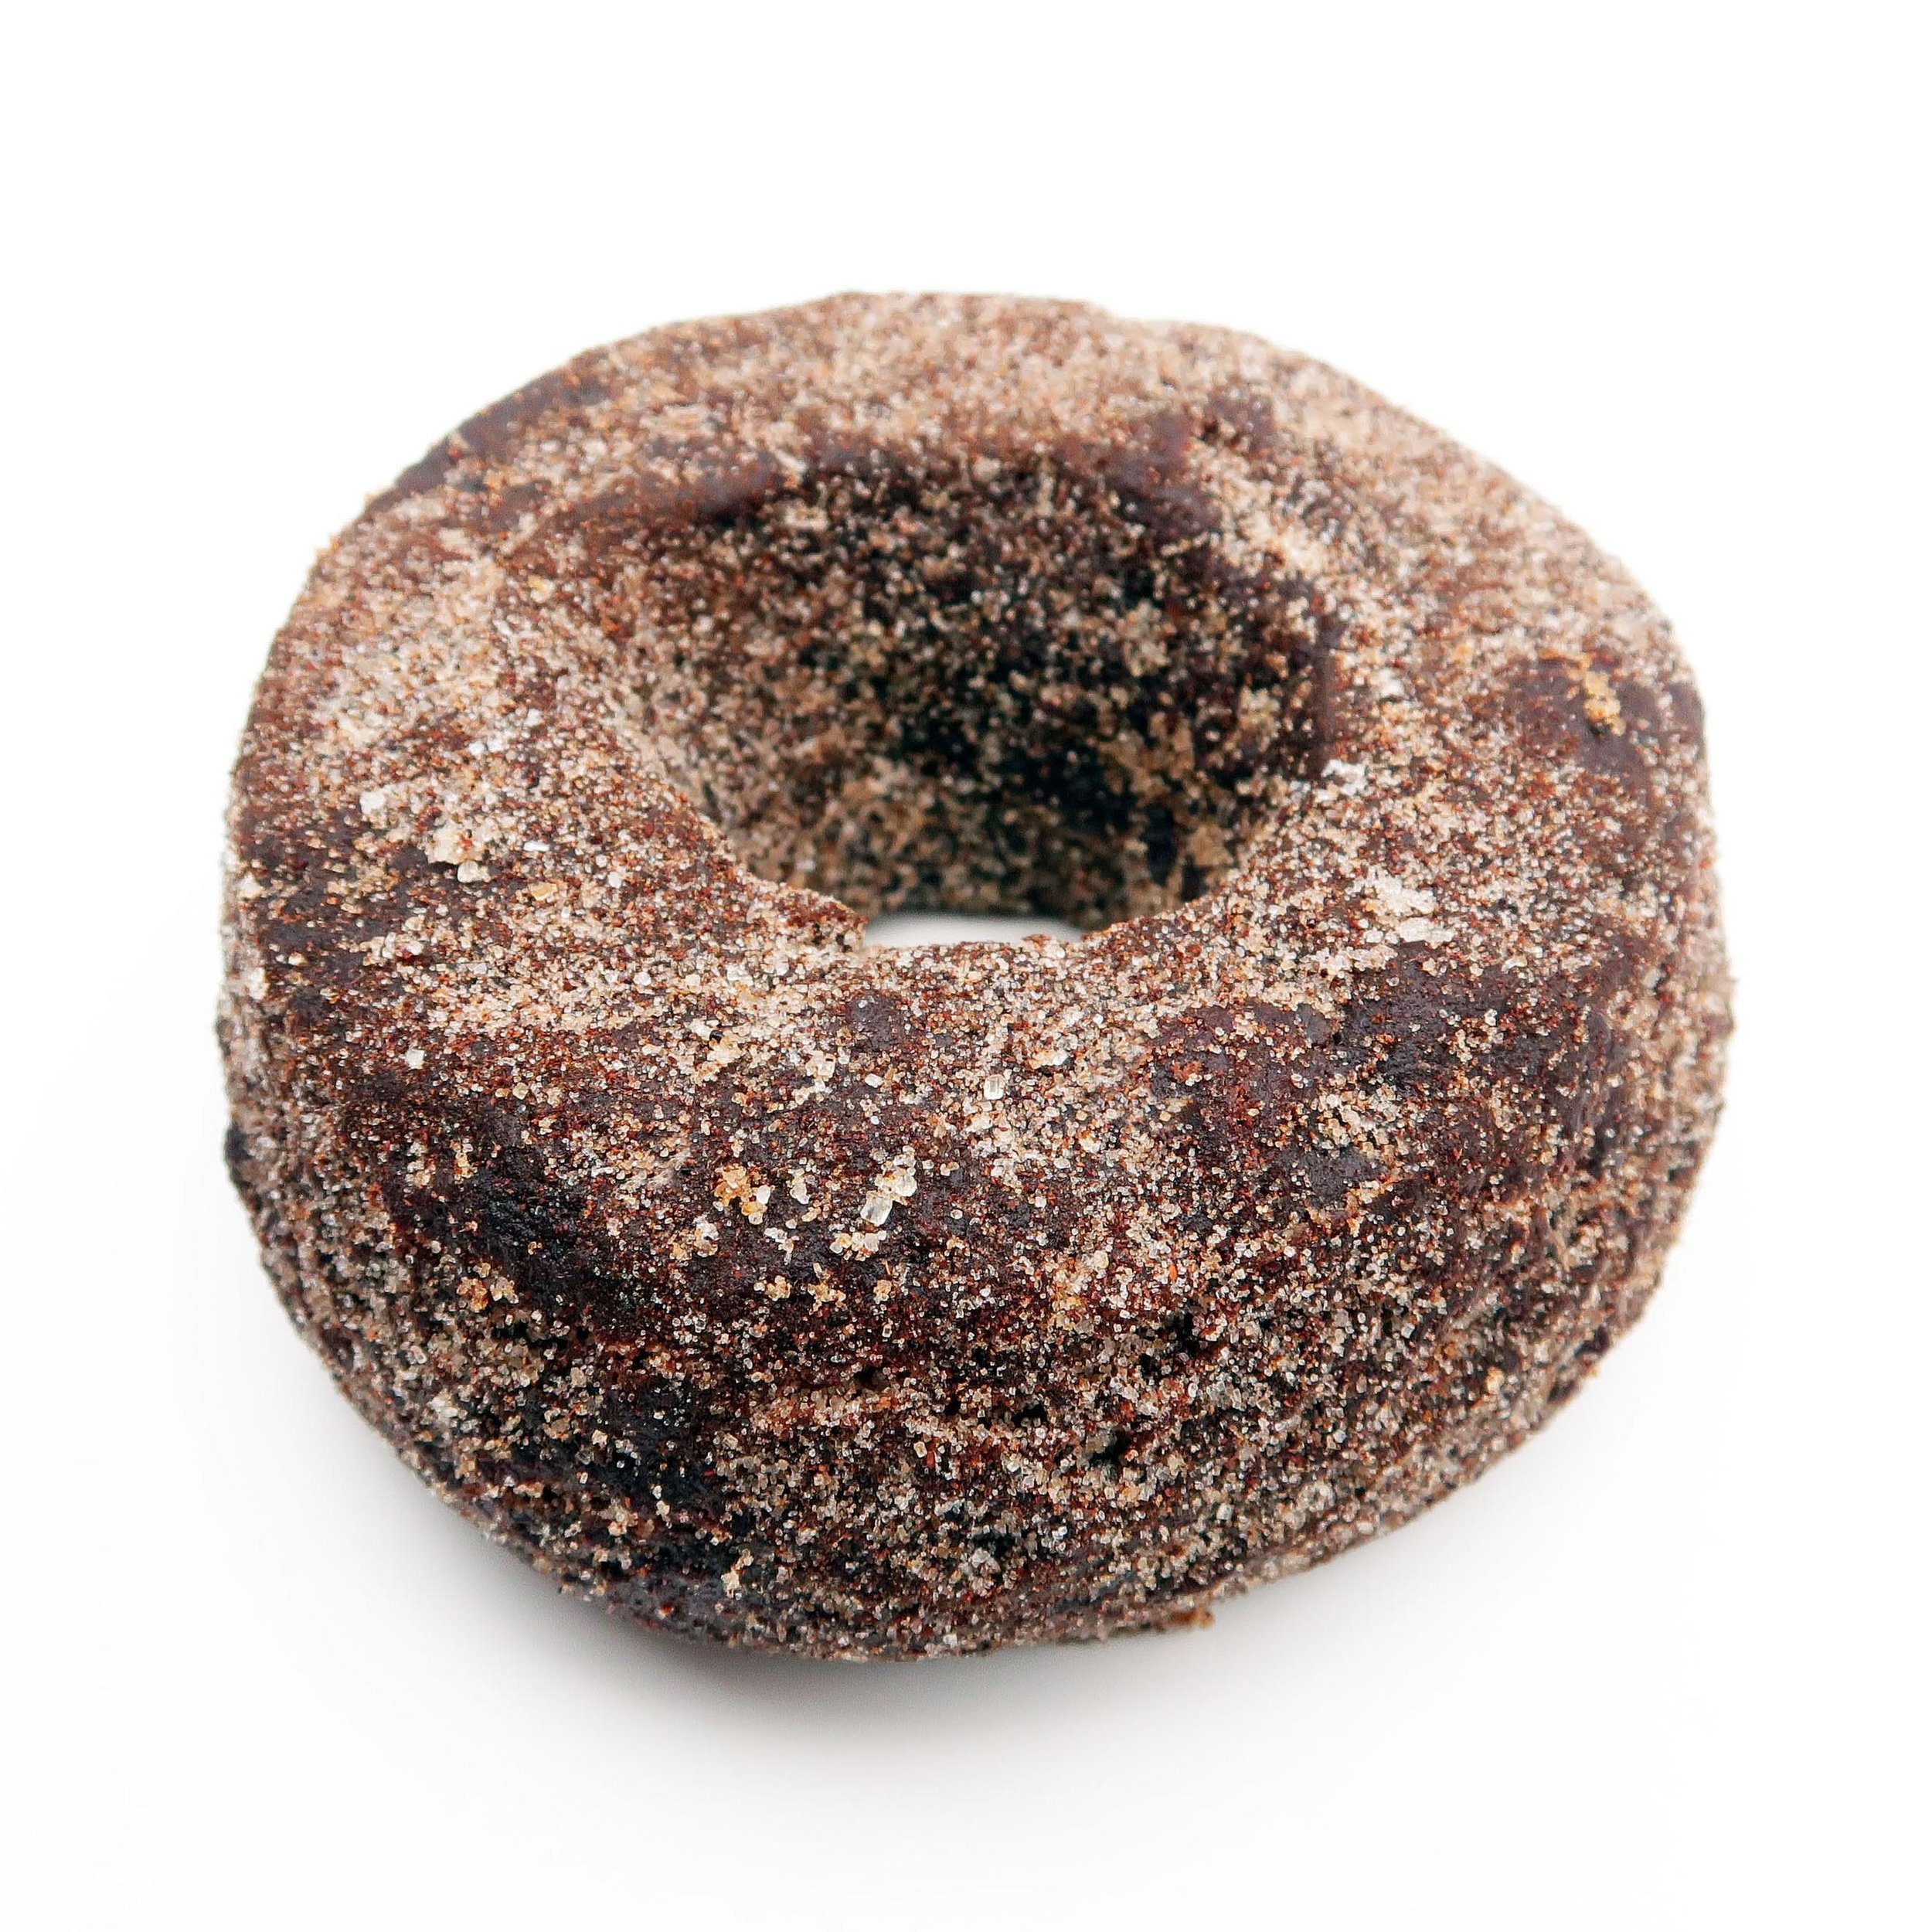 Our famous Spiced Chocolate Donut!

Fun fact - this is a day one flavor that was on the menu for a while until one day we realized that it was actually a vegan flavor! Once we realized that, it wasn&rsquo;t long until we made our other 2 daily chocol